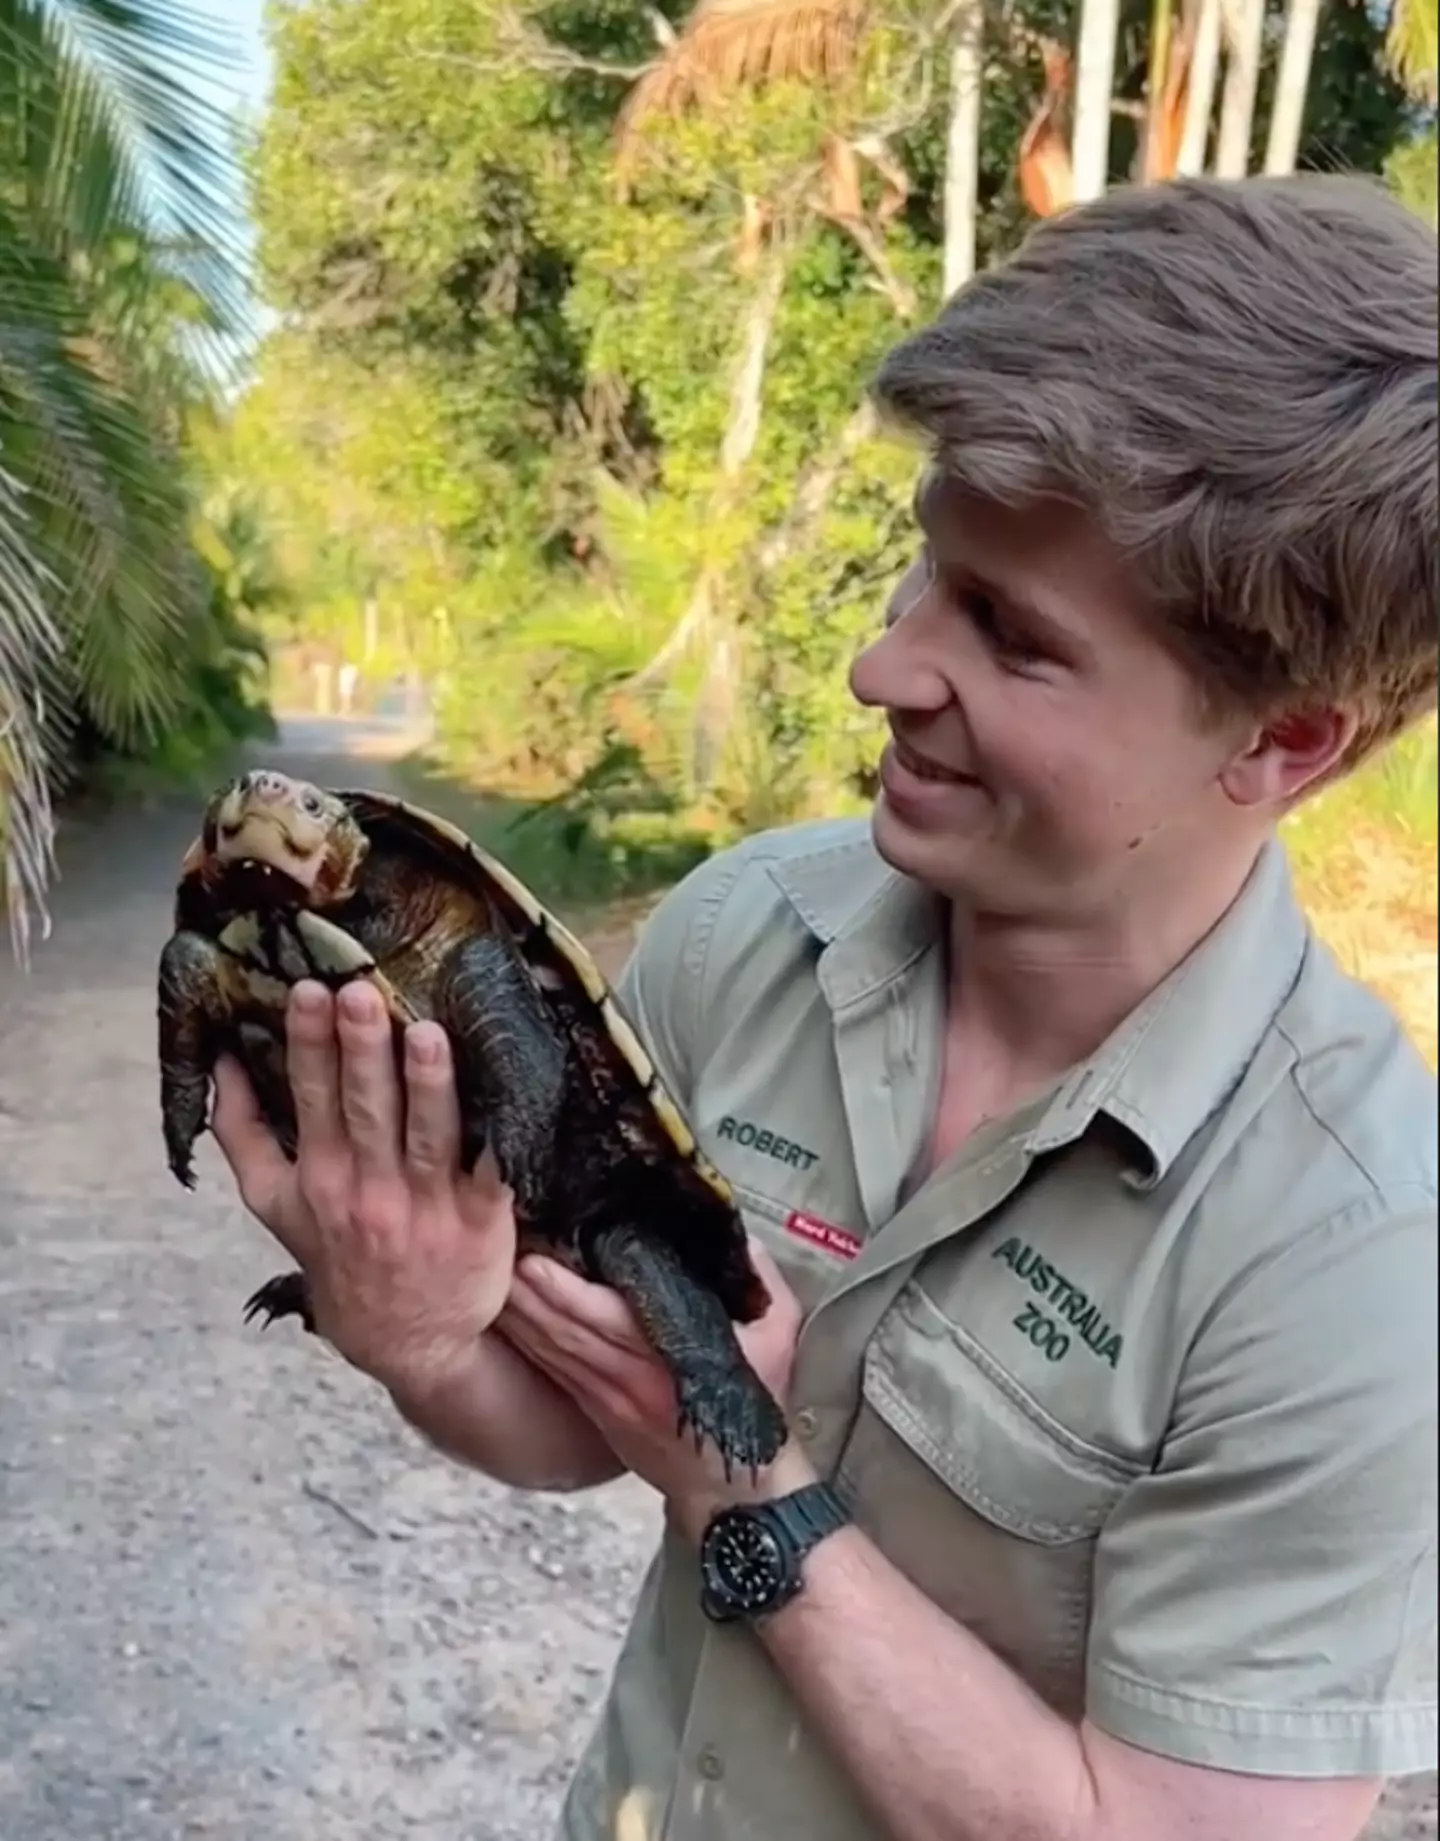 Robert's father, Steve Irwin, first discovered the turtle back in 1990.